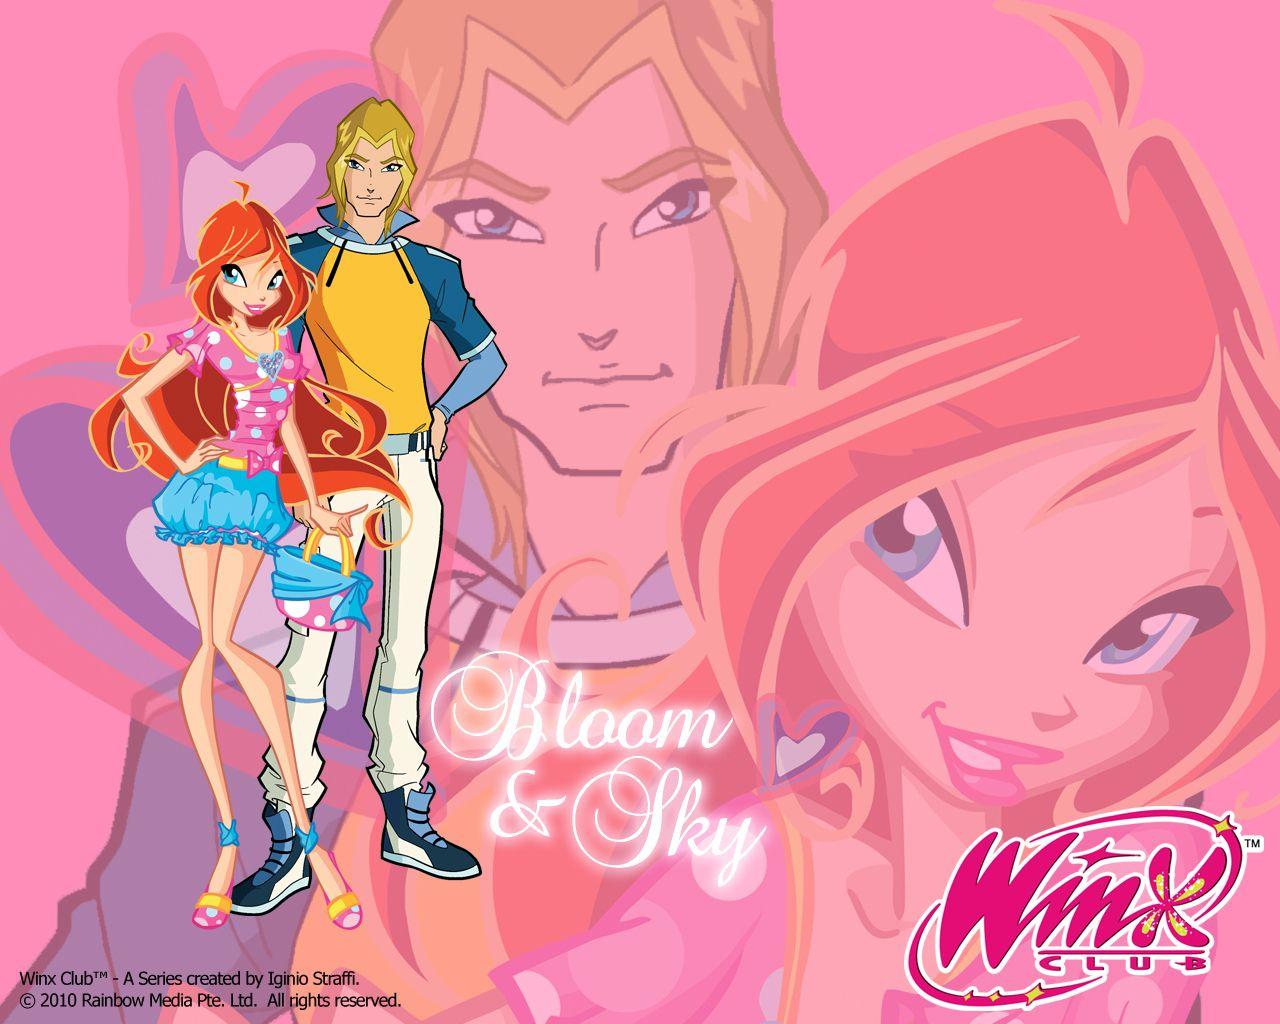 Couples from Winx Club image couples HD wallpaper and background